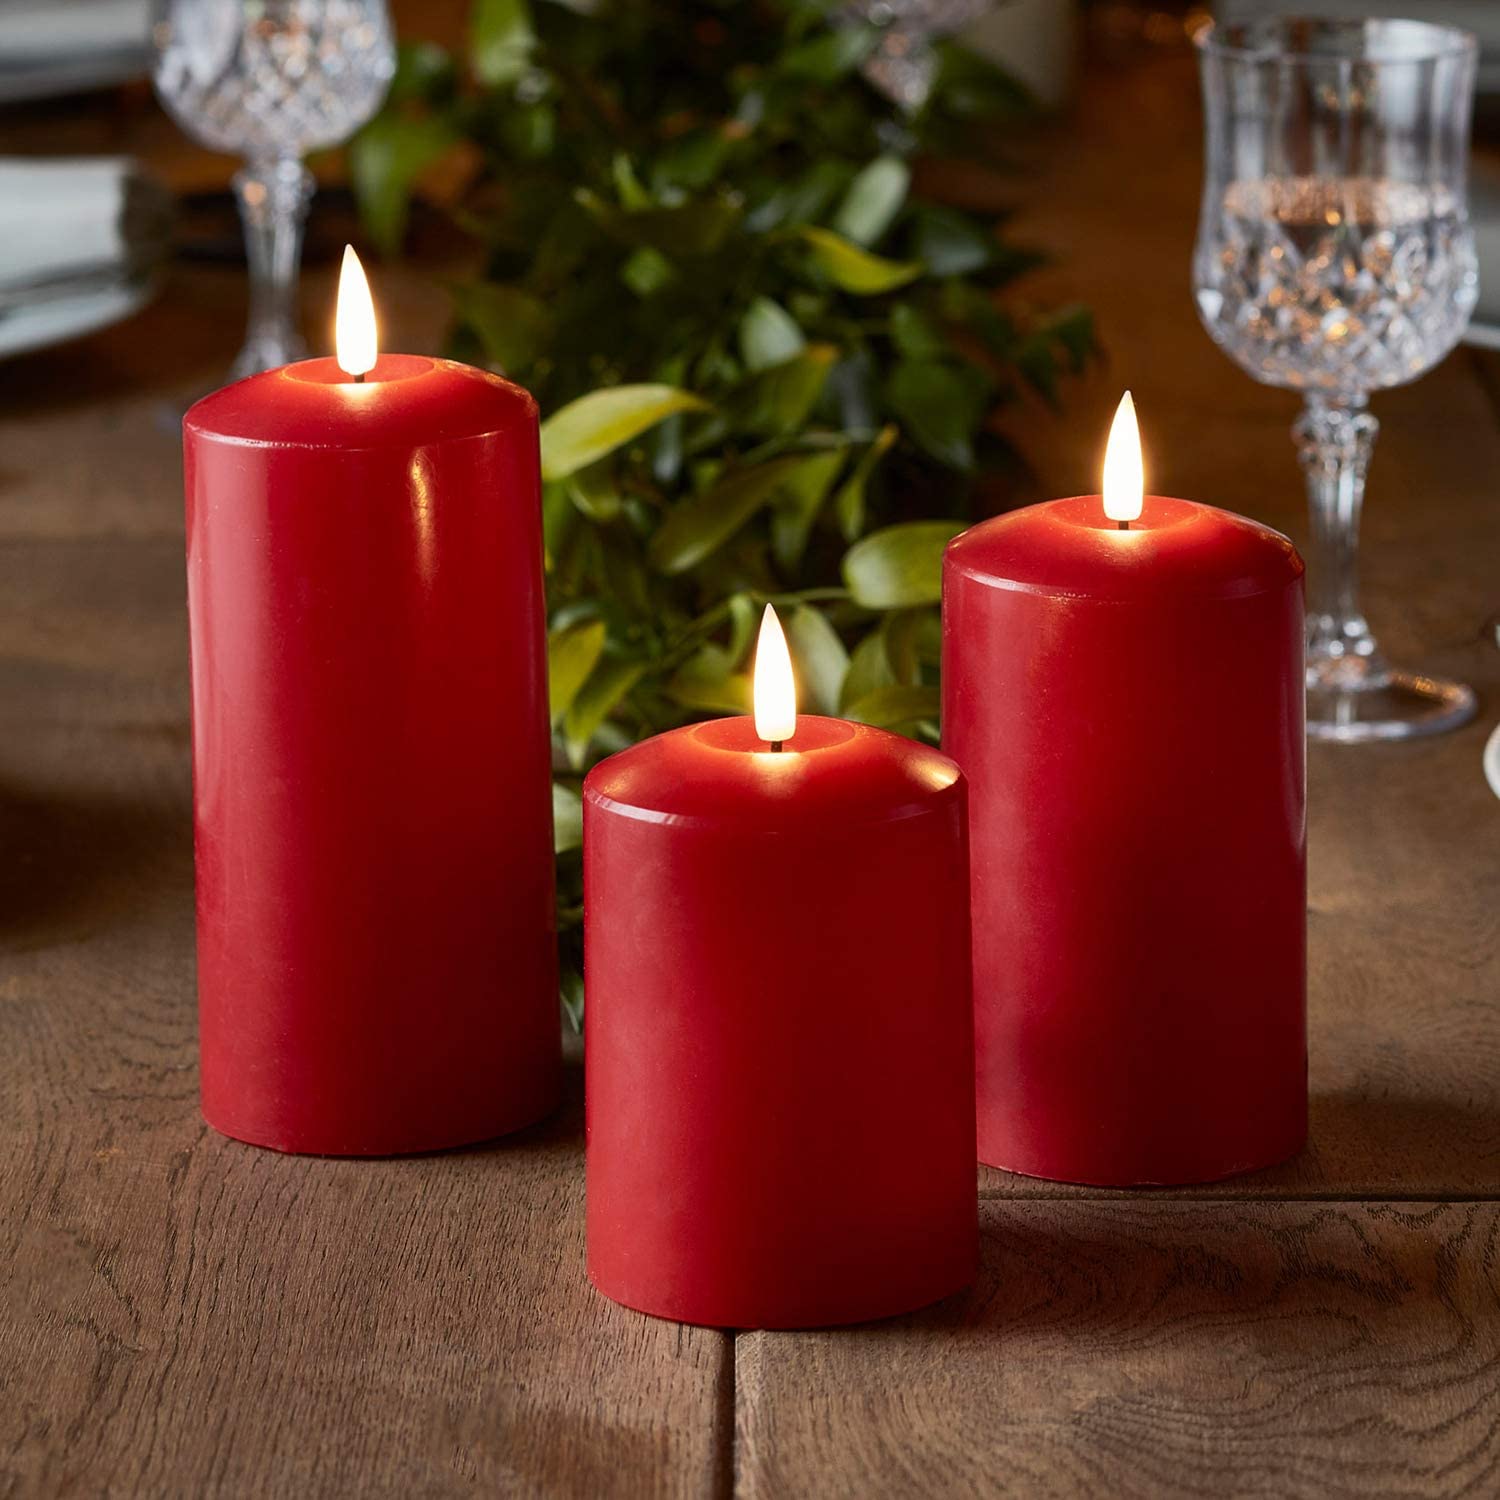 Lexi Lighting Christmas Table Decoration&Candle Set of 2 LED Red Wax Pillar Candles - 3 Size Options